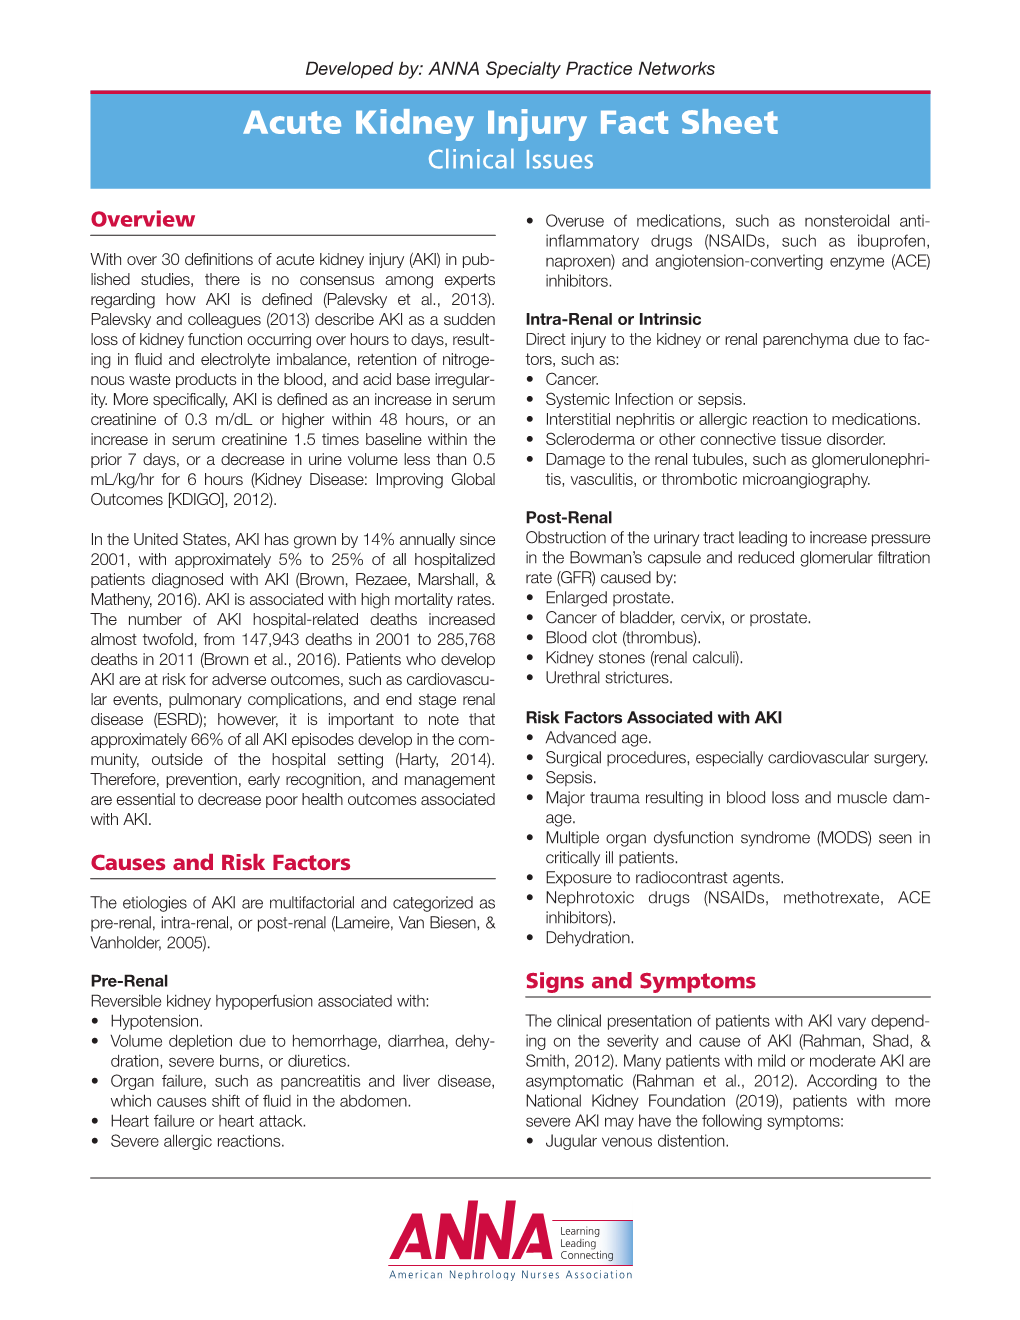 Acute Kidney Injury Fact Sheet Clinical Issues